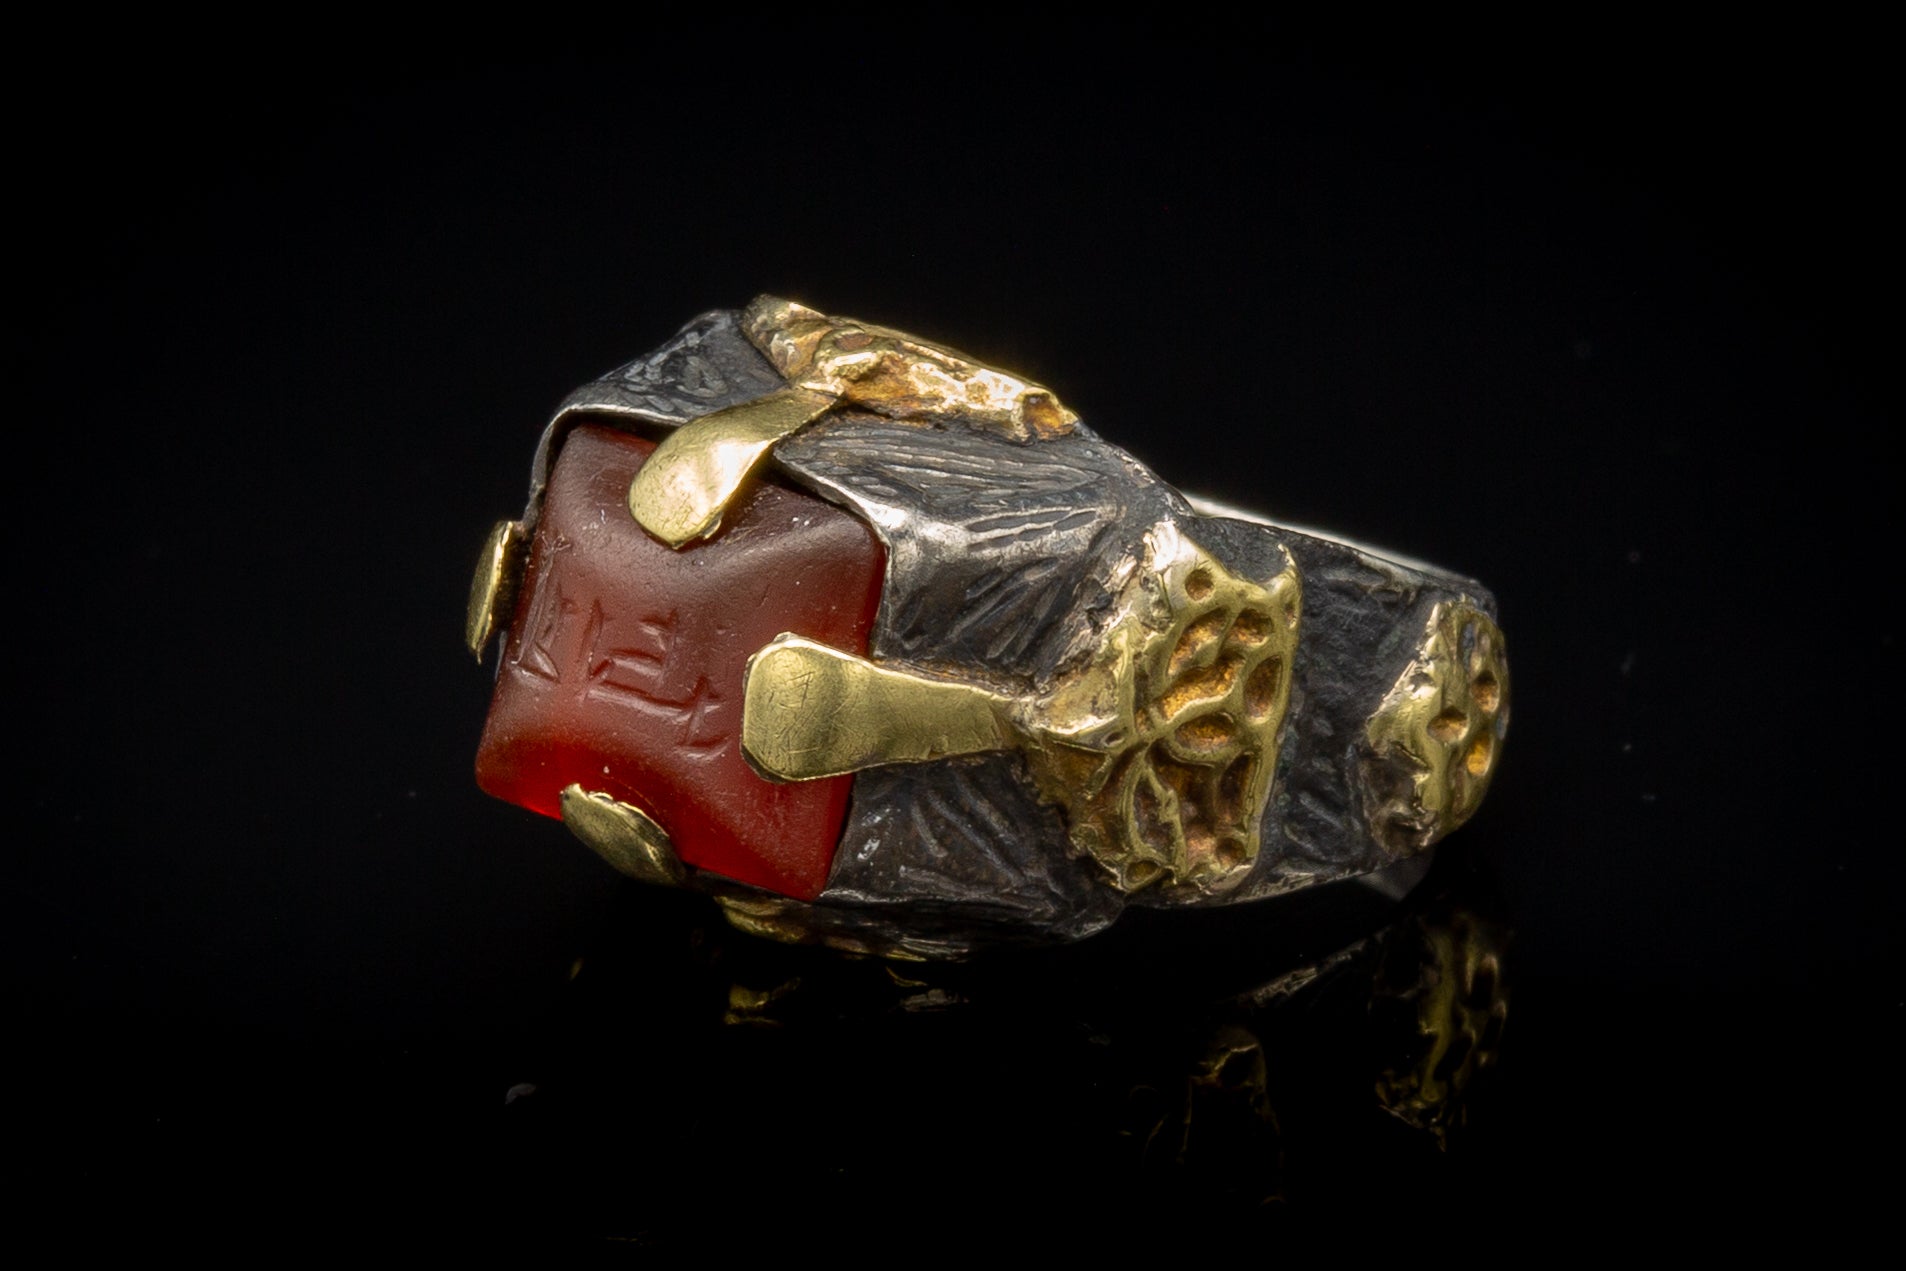 This incredible piece dates to the 11th century Seljuk dynasty. The carnelian intaglio is set within a typical Seljuk tapered rectagonal bezel with a four-pronged gold setting soldered to the outside of the bezel. Applied and pierced high carat gold